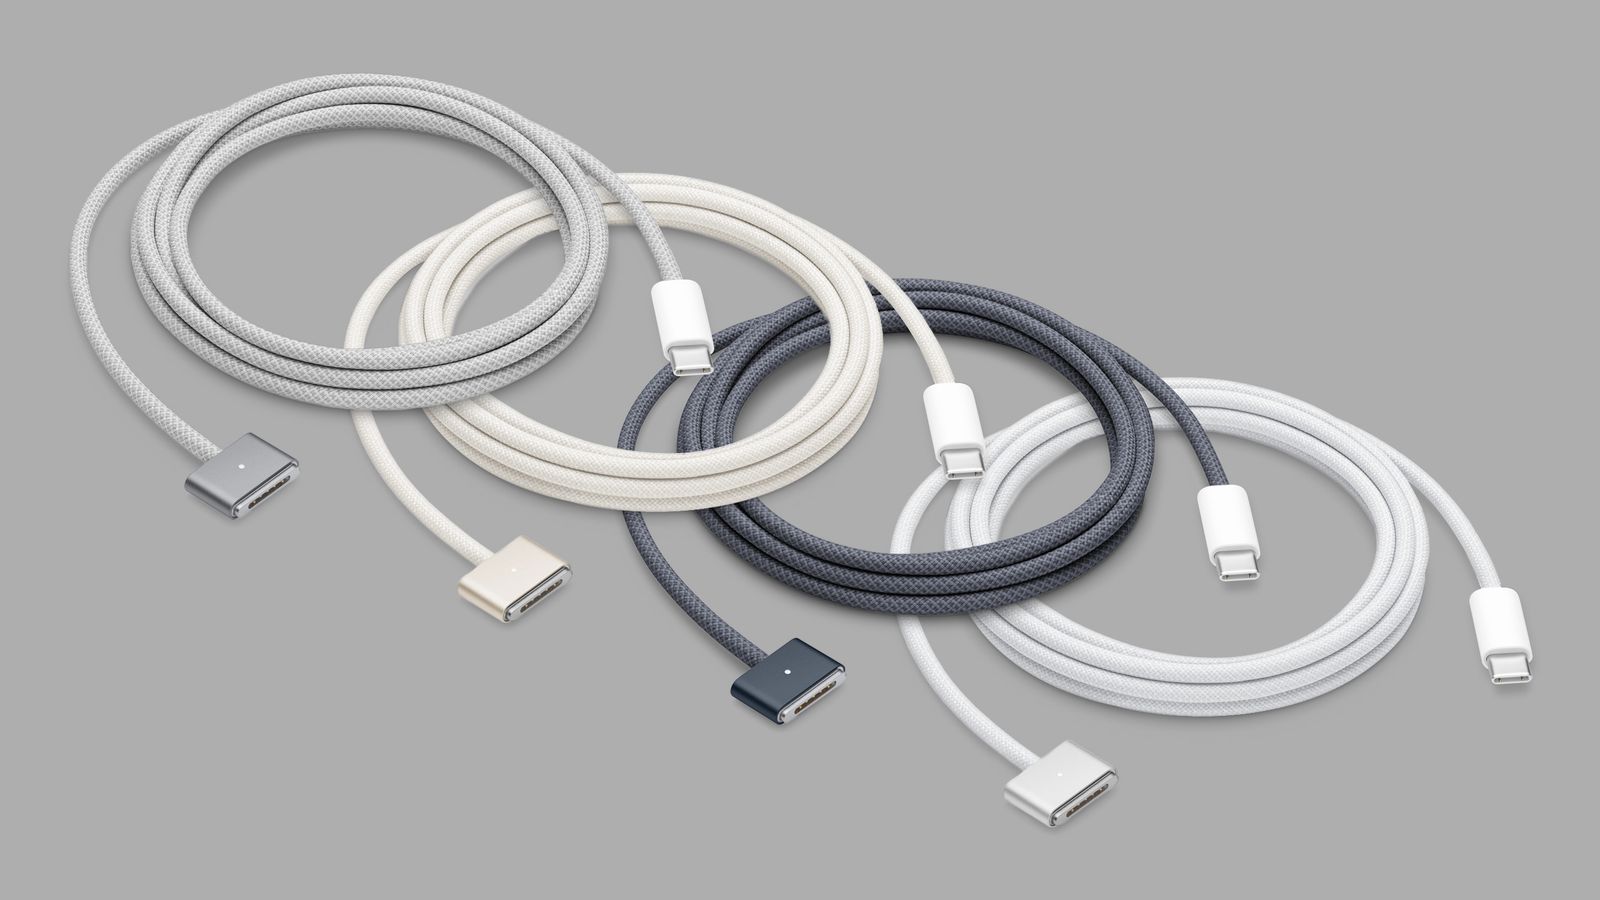 MagSafe 3 Charging Cable Now Available in New Colors Matching MacBook Air -  MacRumors